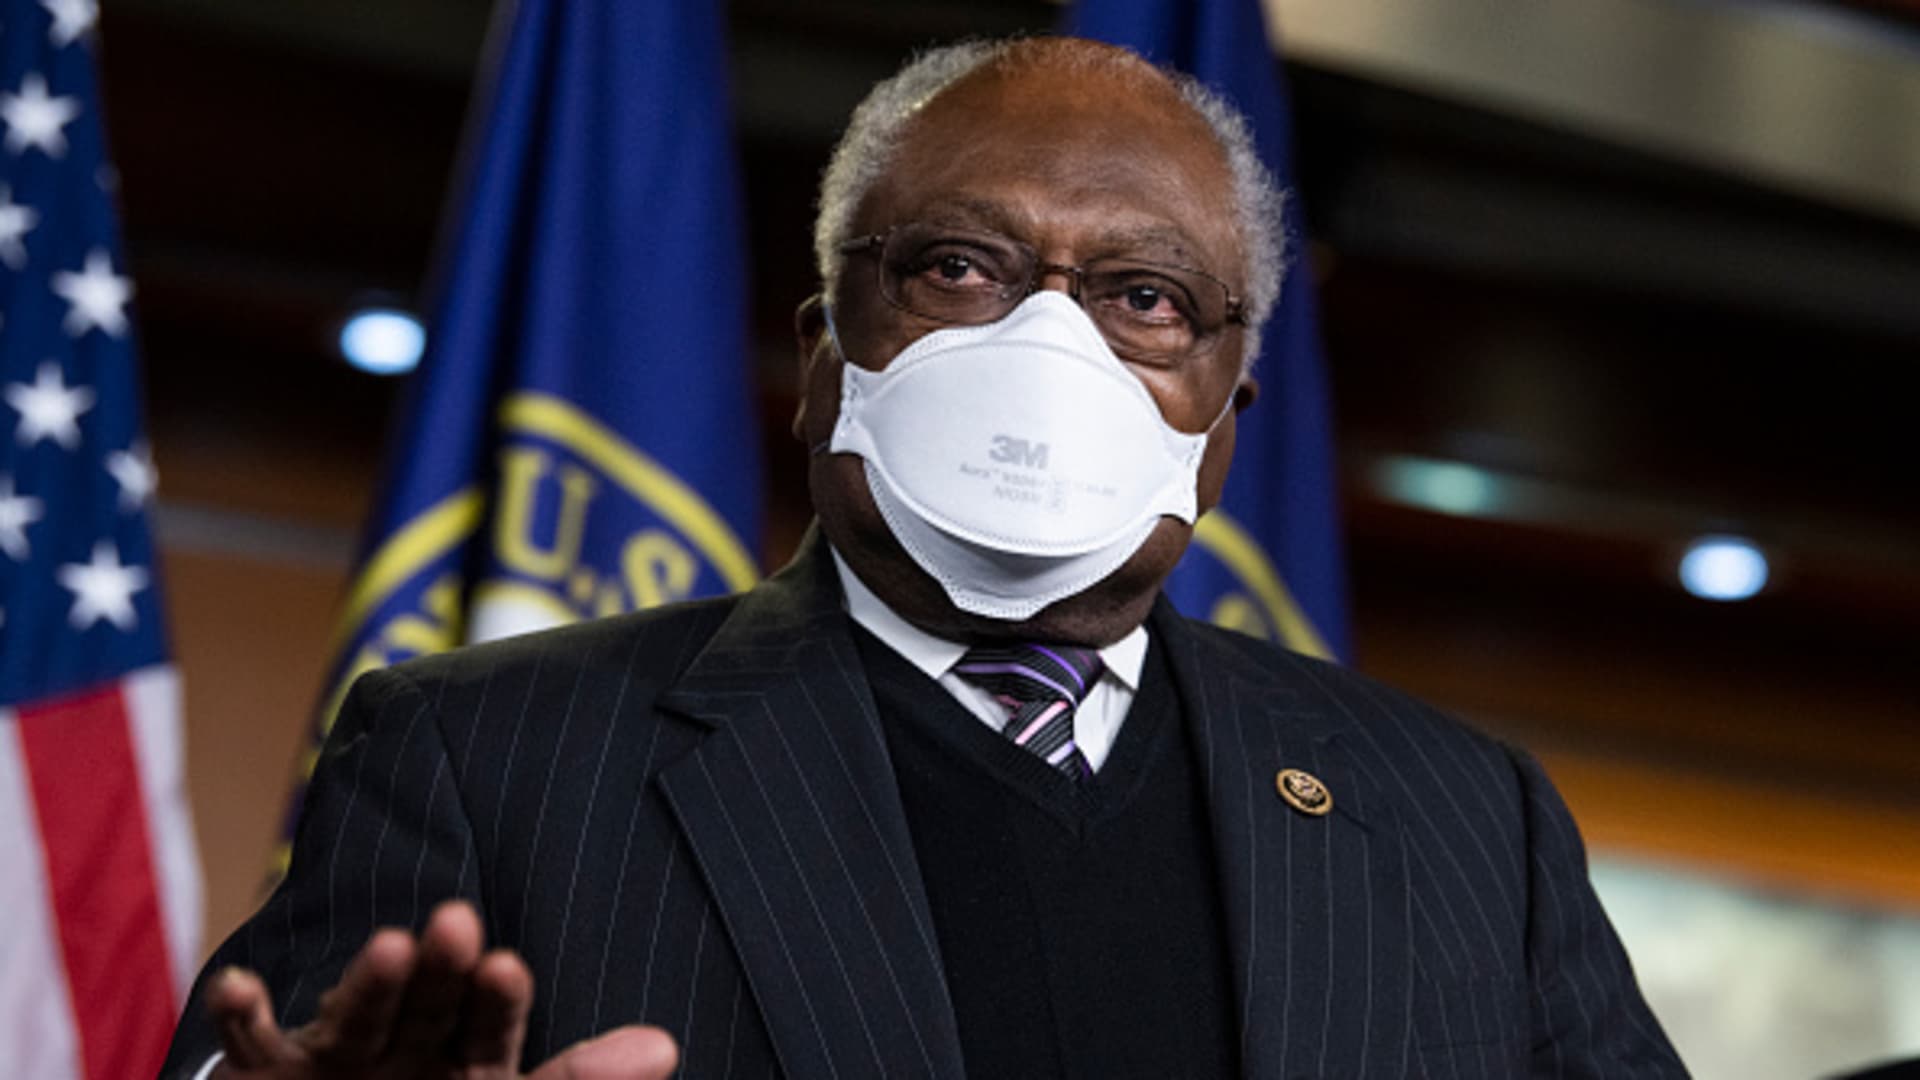 House Majority Whip James Clyburn, D-S.C., conducts a news conference on the coronavirus relief bill, the American Rescue Plan Act, in the Capitol Visitor Center on Tuesday, March 9, 2021.